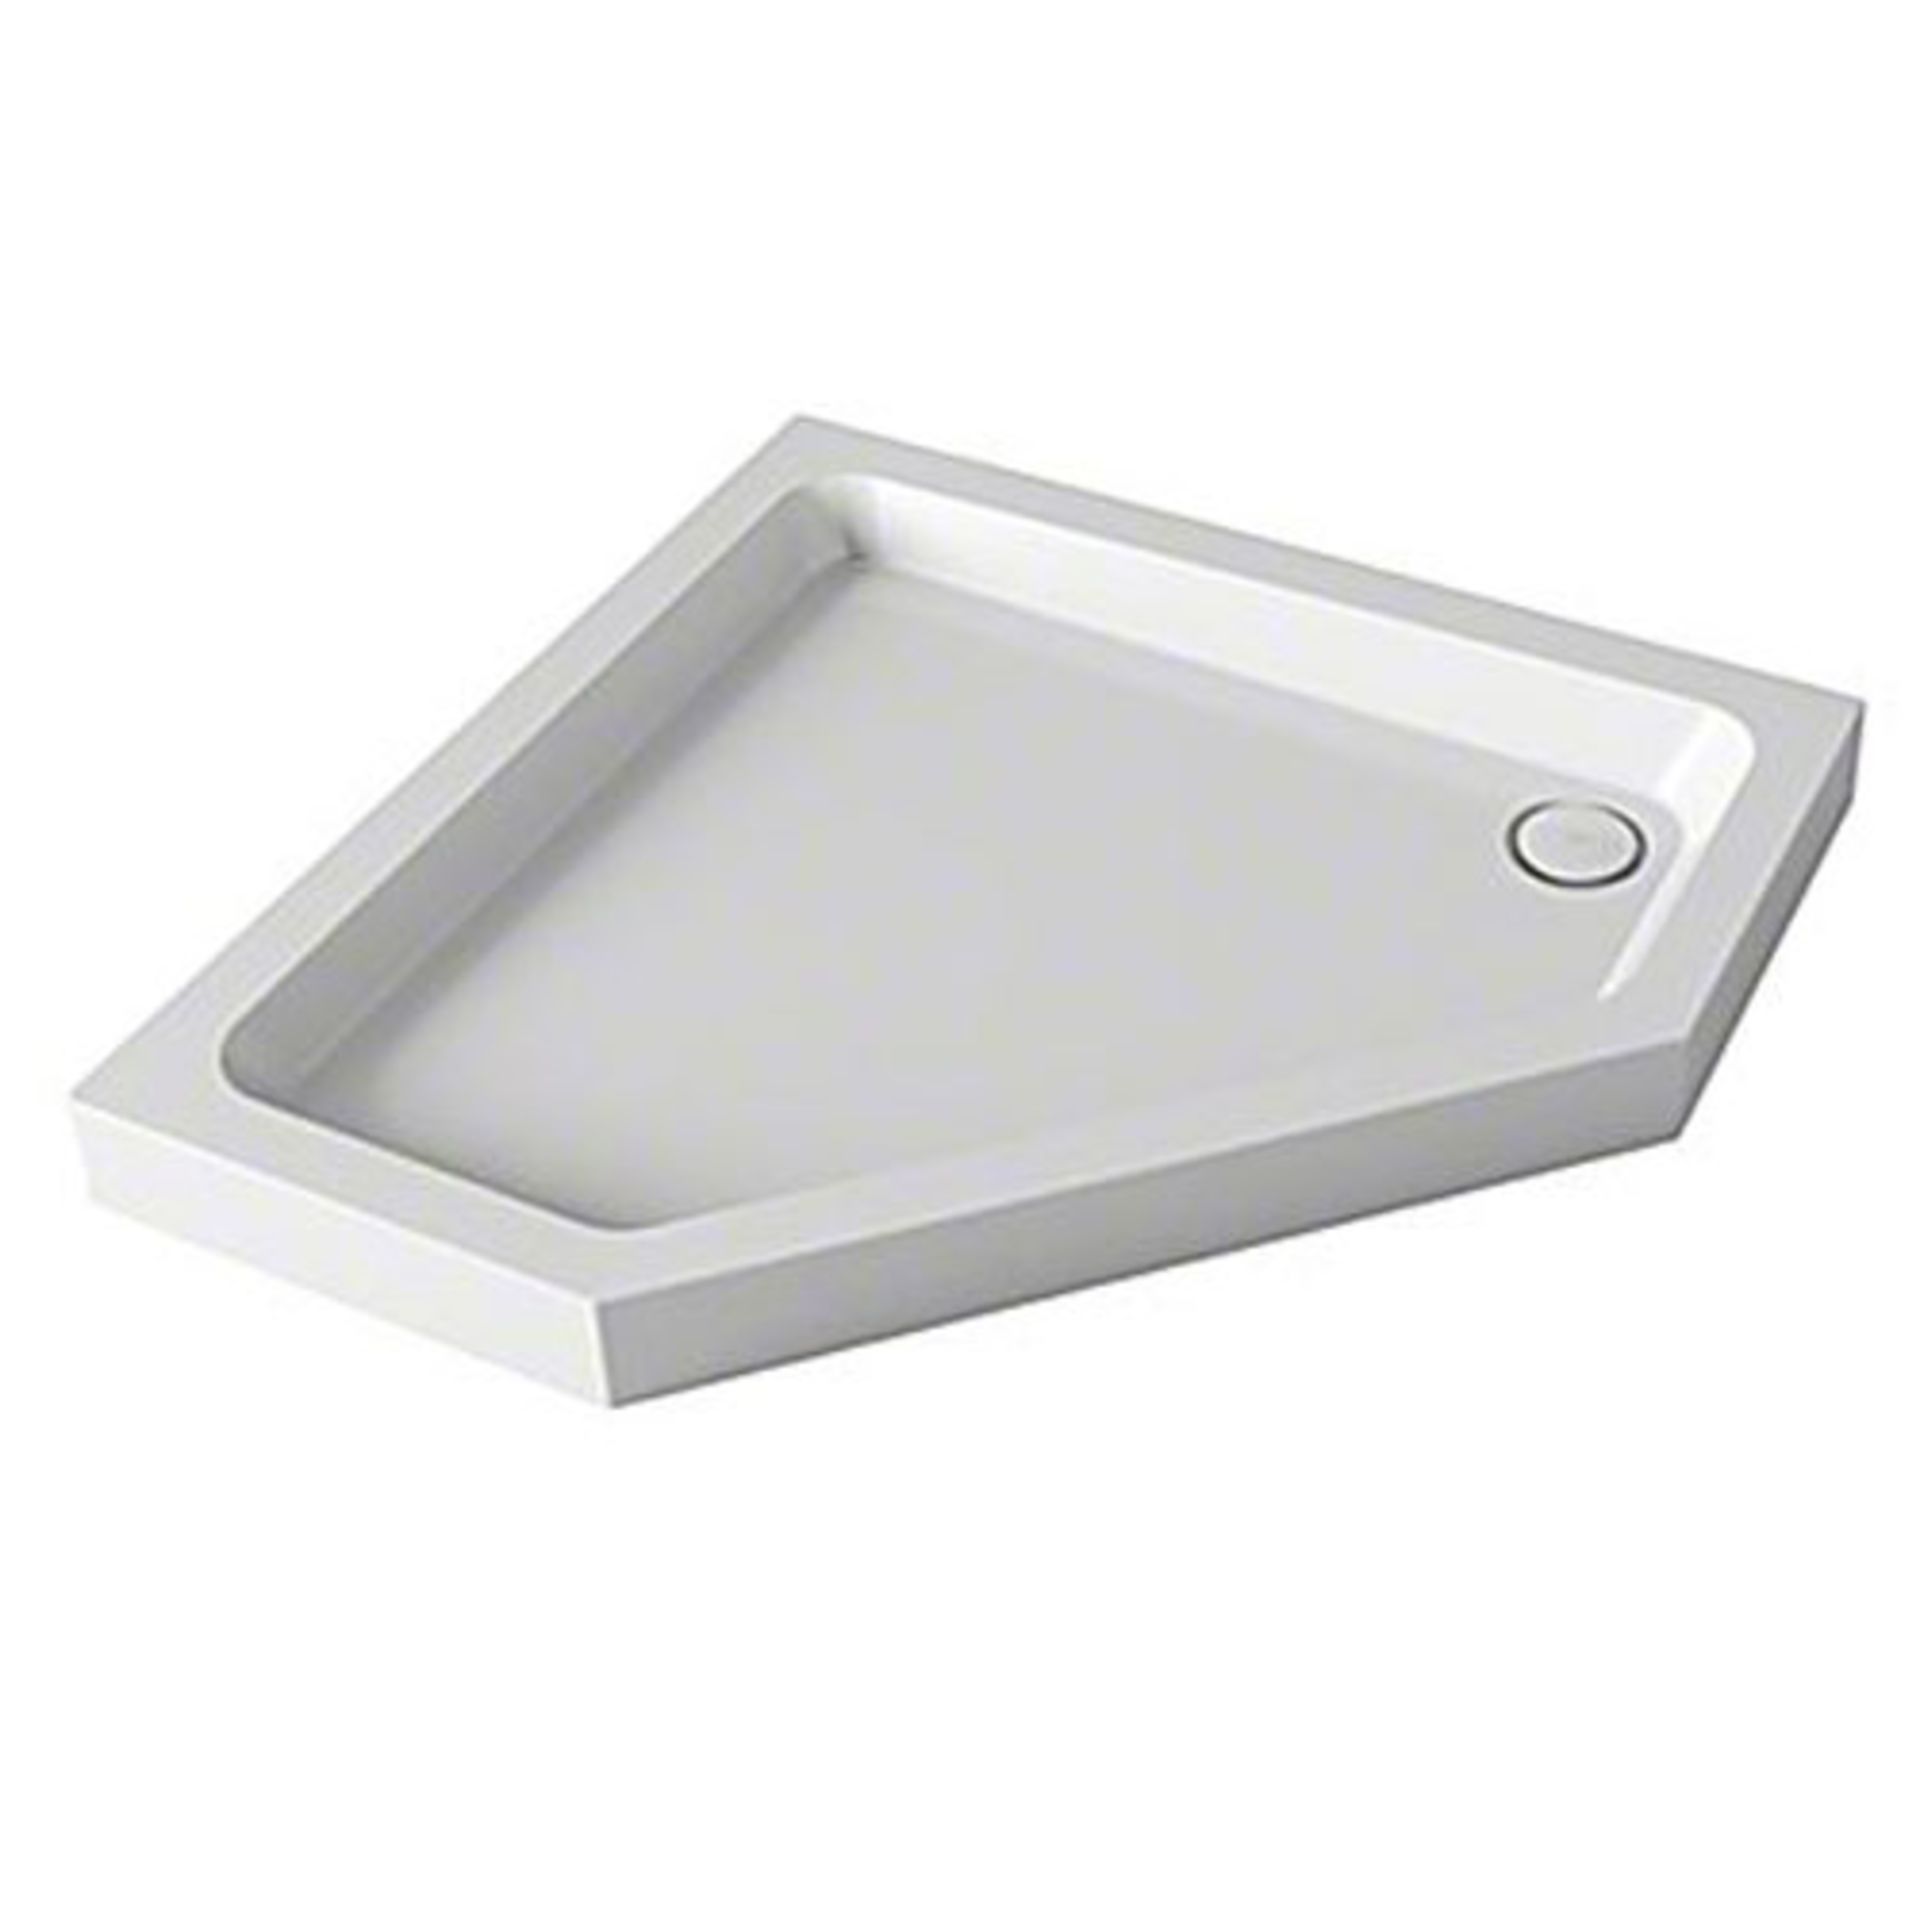 Shower tray Pentagonal off white stone resin Height - 100mm, Width - 1200mm, Width - 900mm